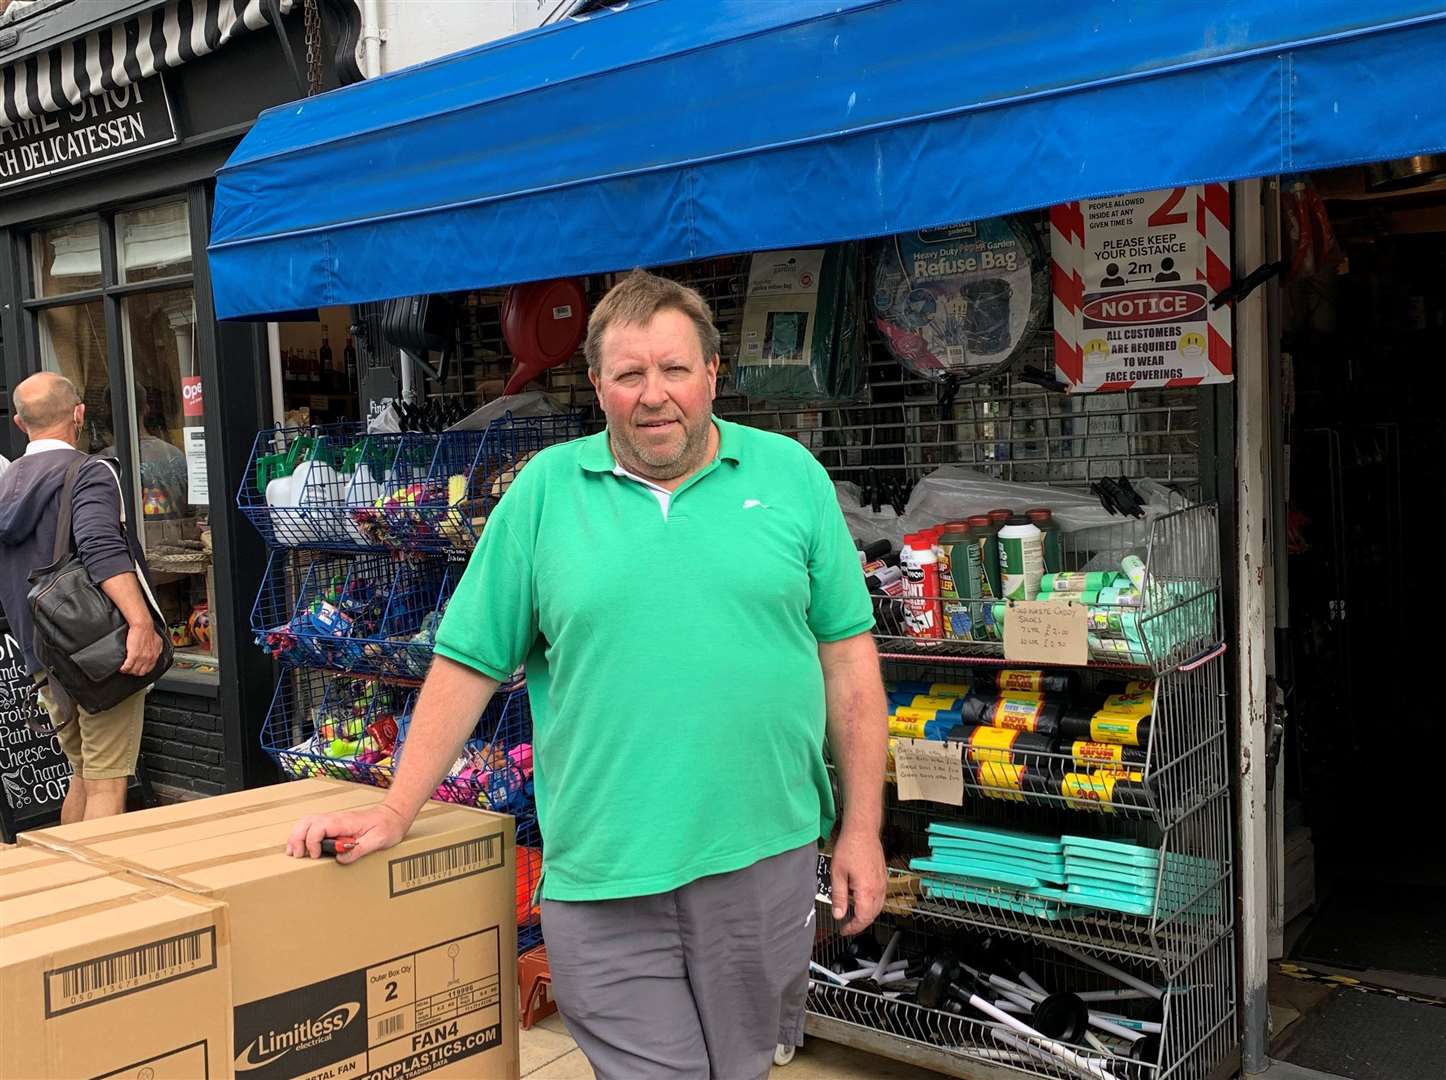 Jason Down, owner of Allsorts tools and DIY in Deal, has died